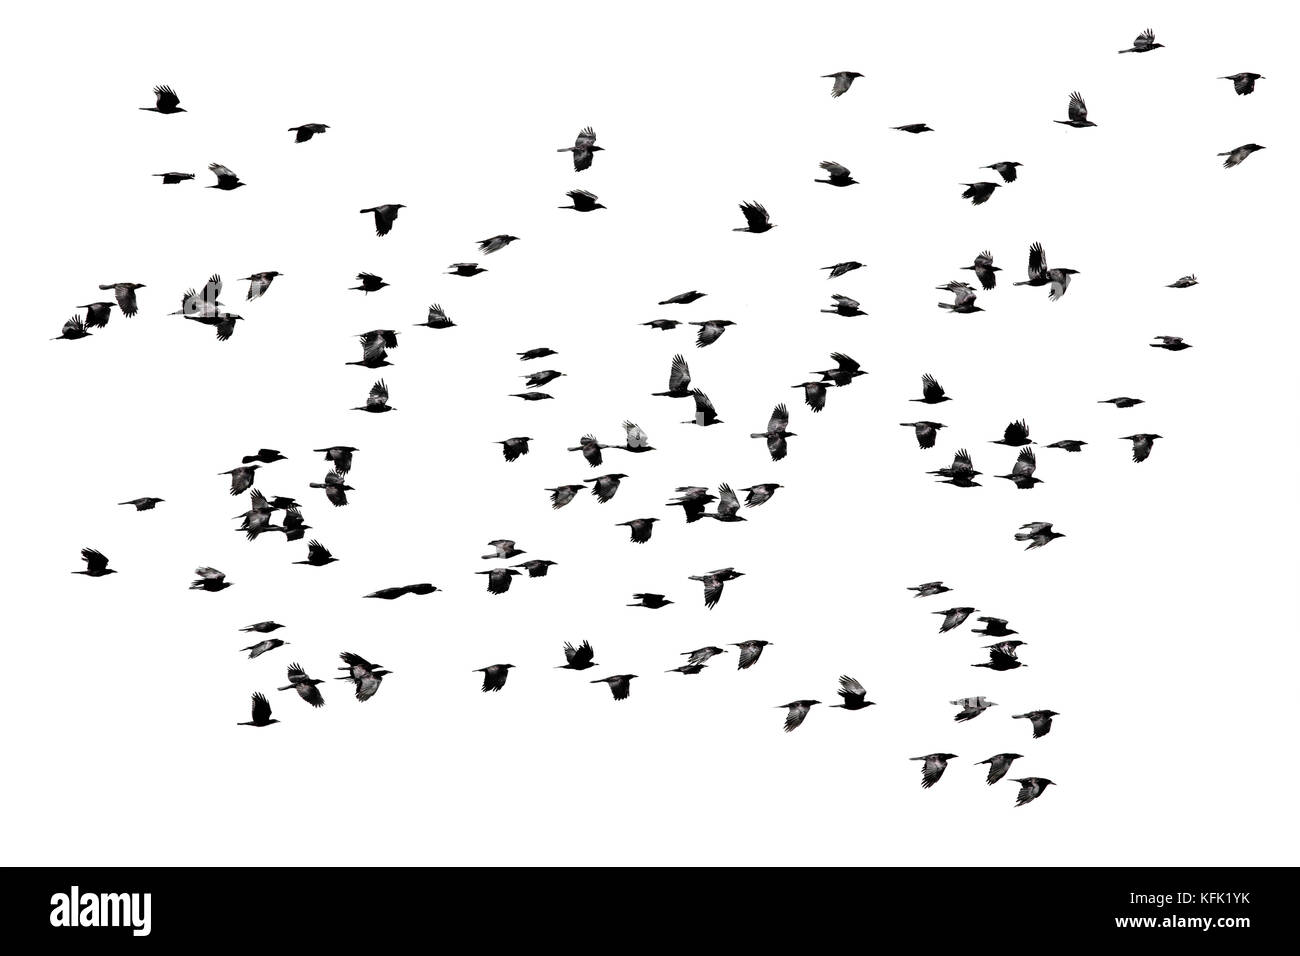 a flock of black crows flying wings spread on a white isolated background Stock Photo